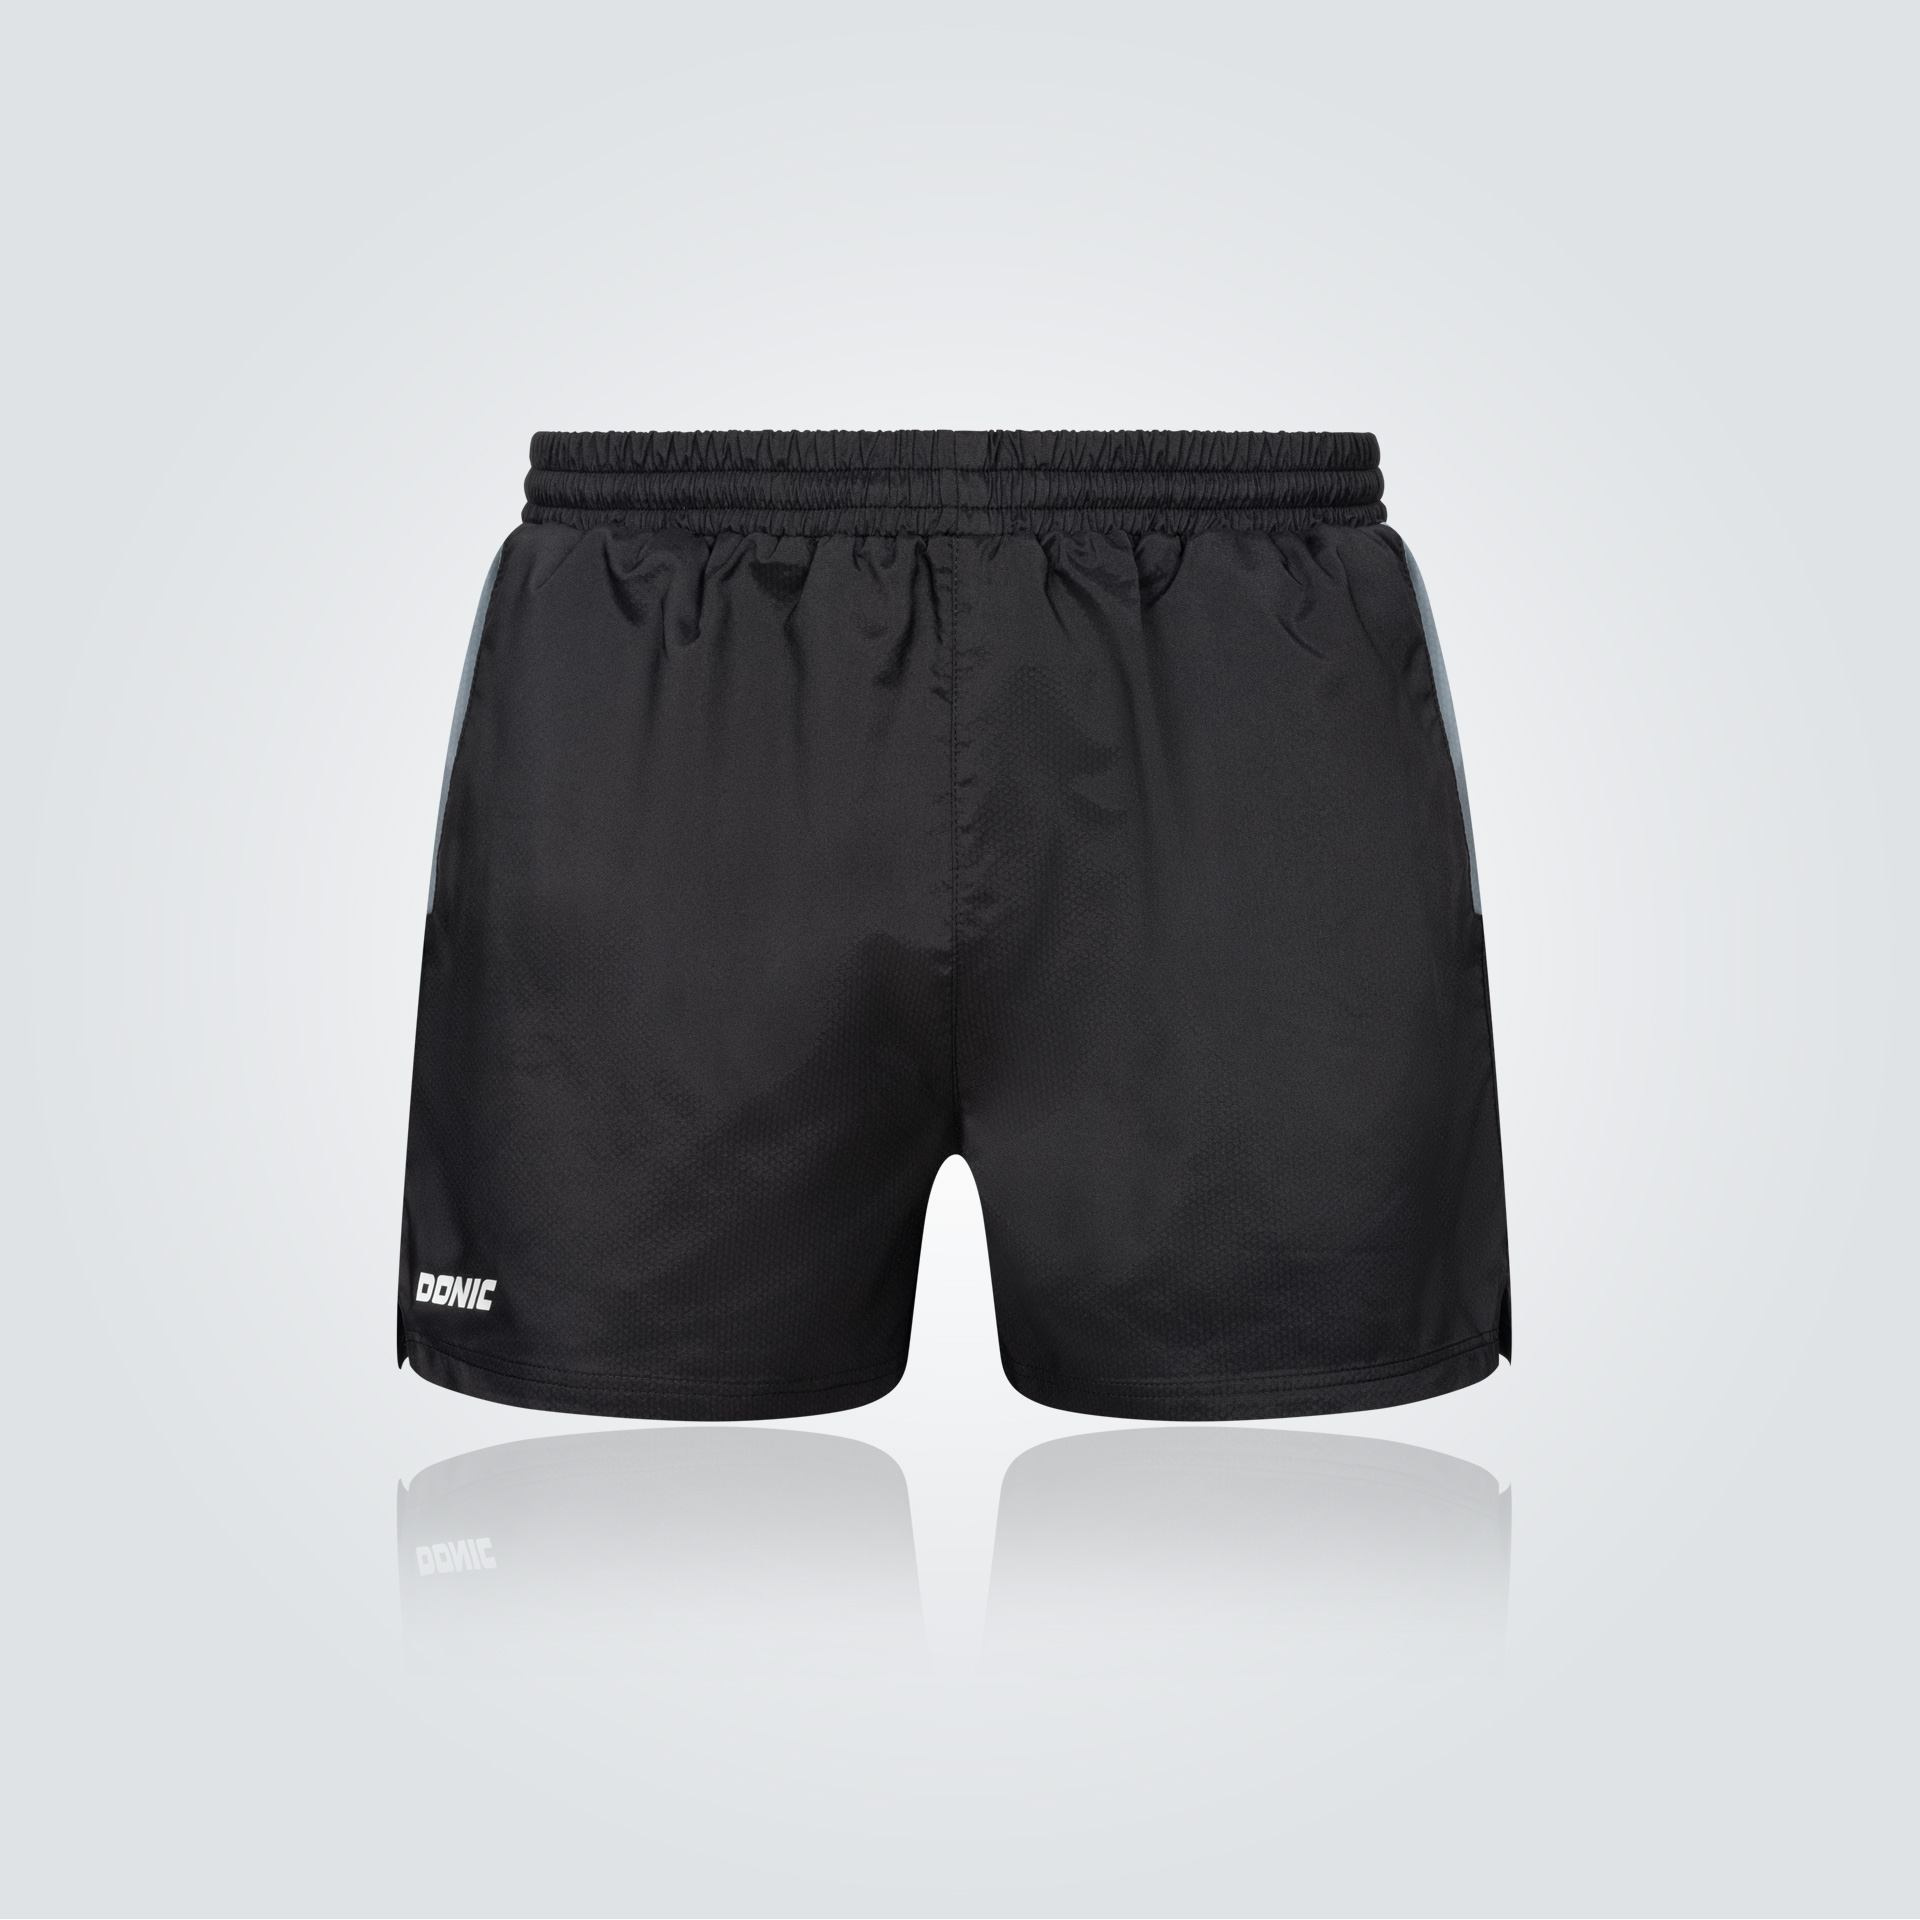 DONIC Shorts Dive